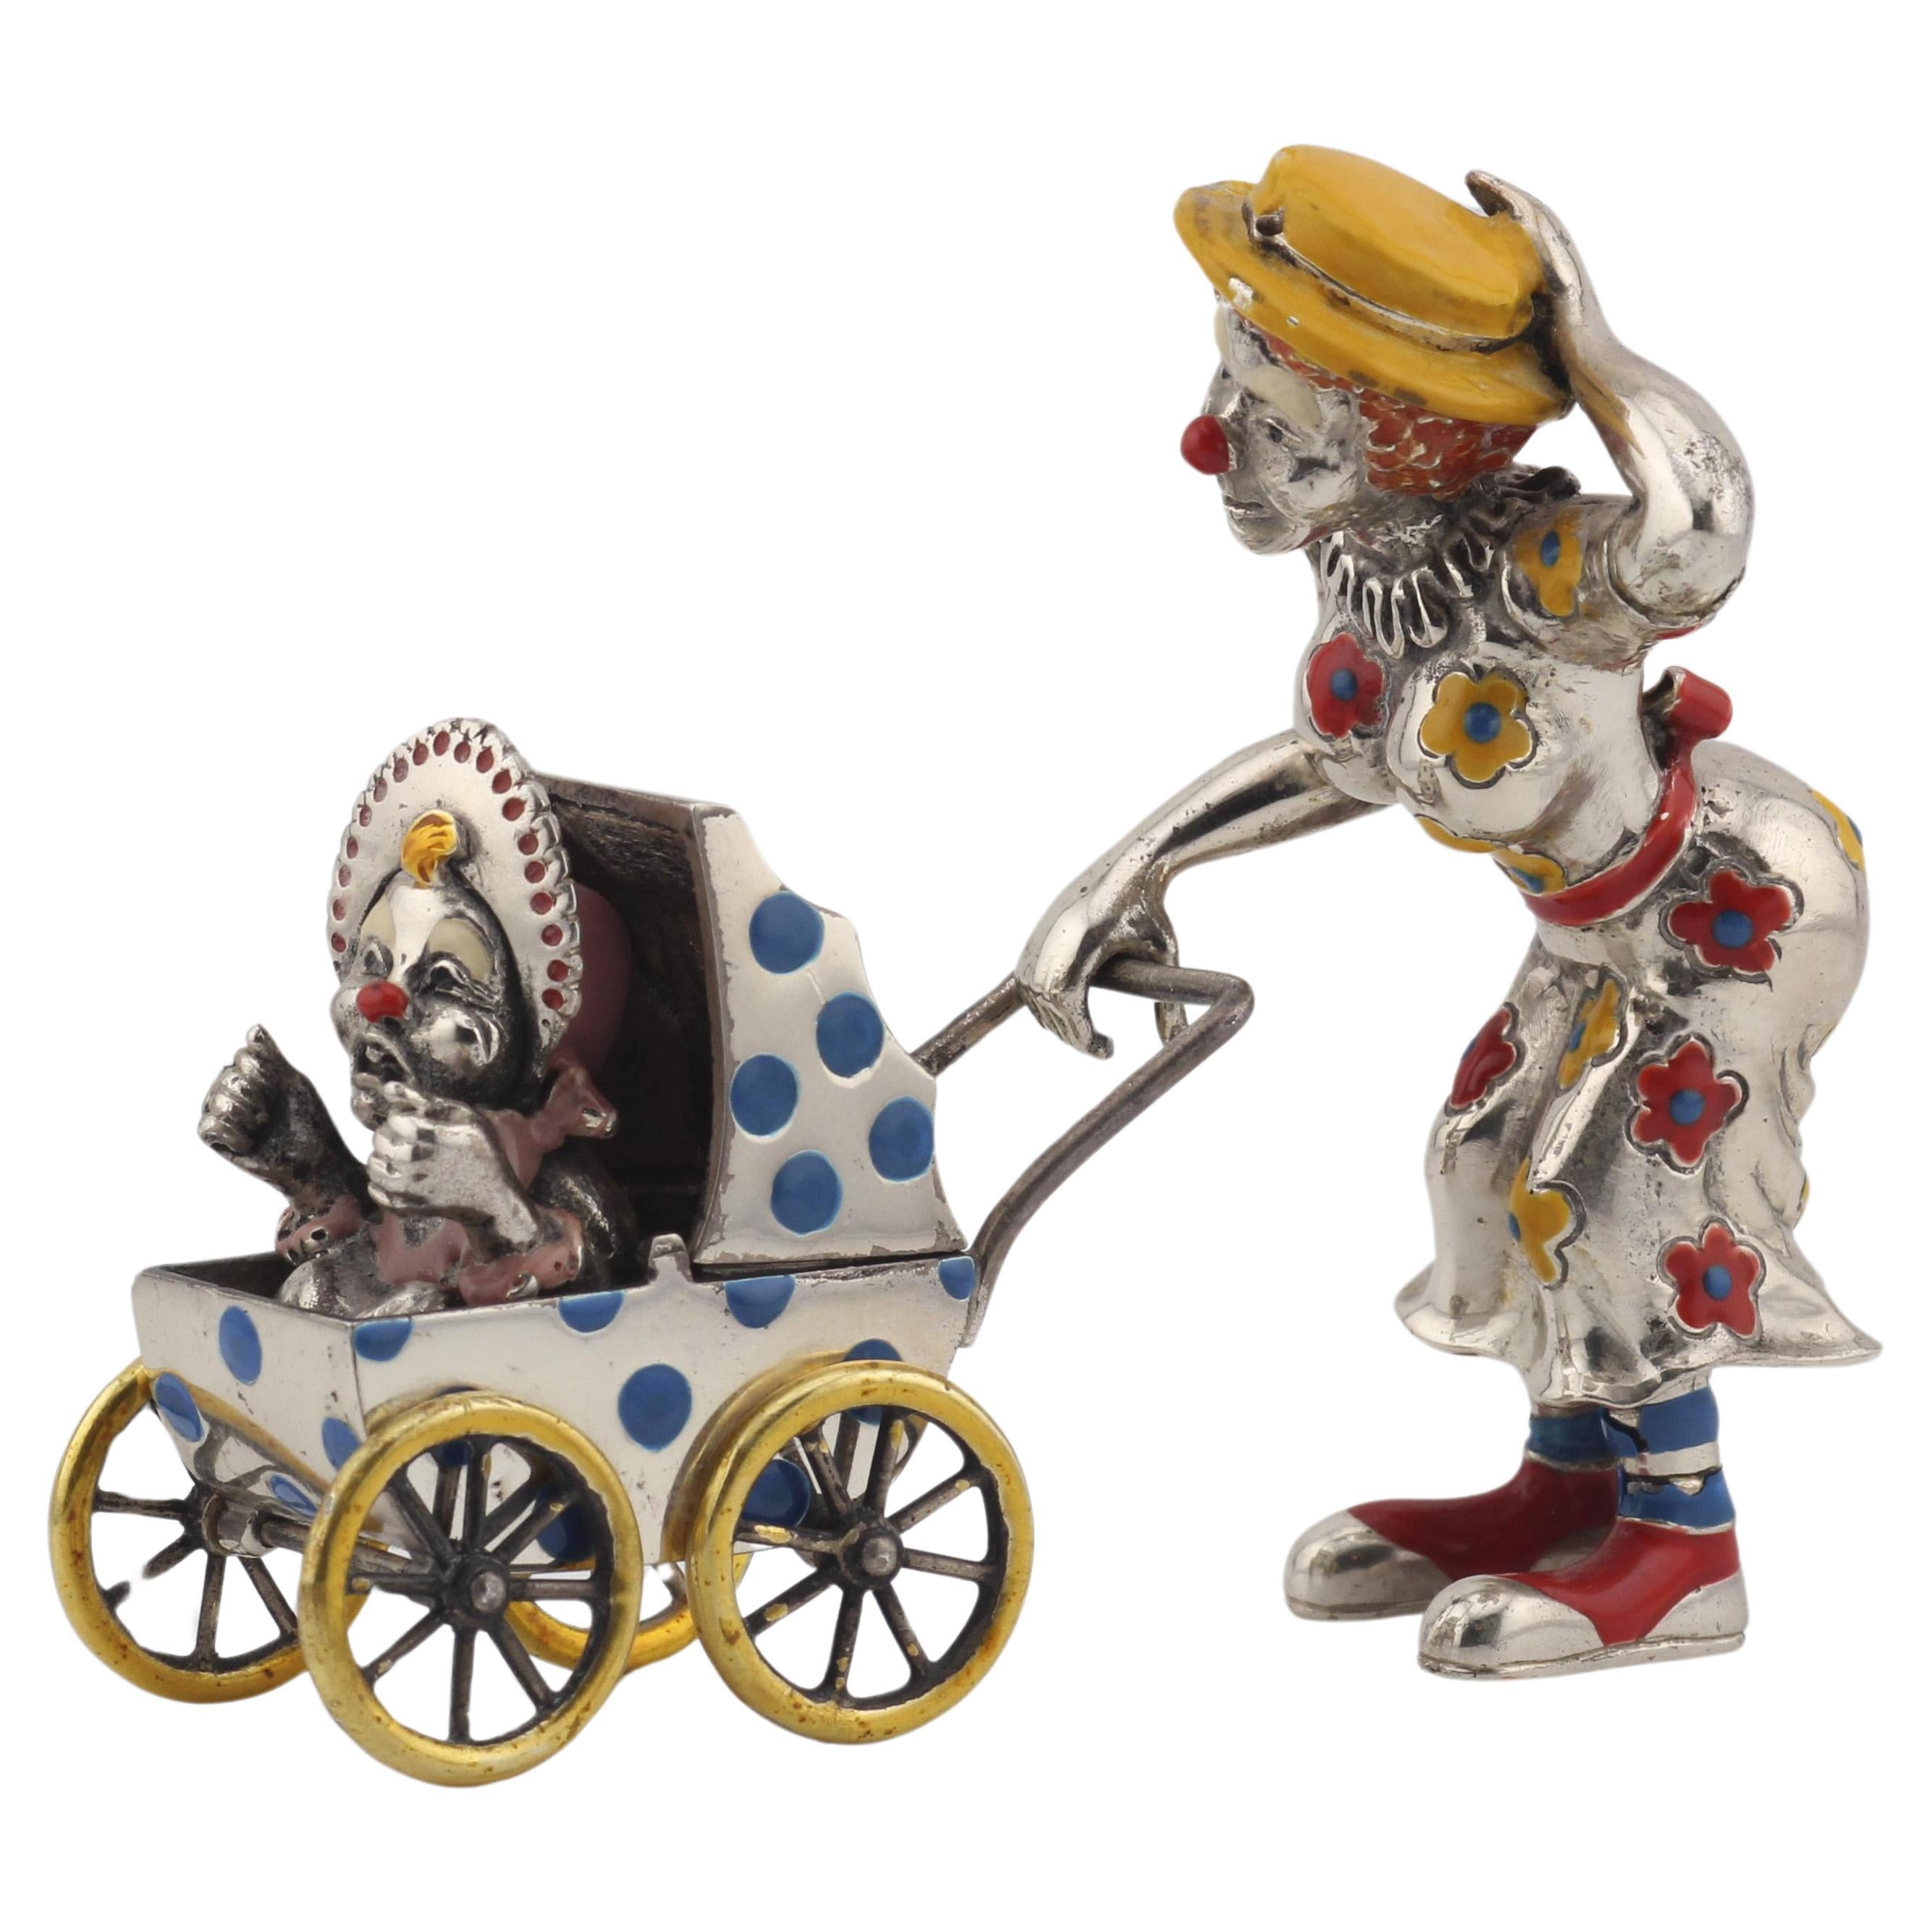 Tiffany & Co.  Silver Enamel Circus Clown Mother w/ Baby in Carriage Figurine